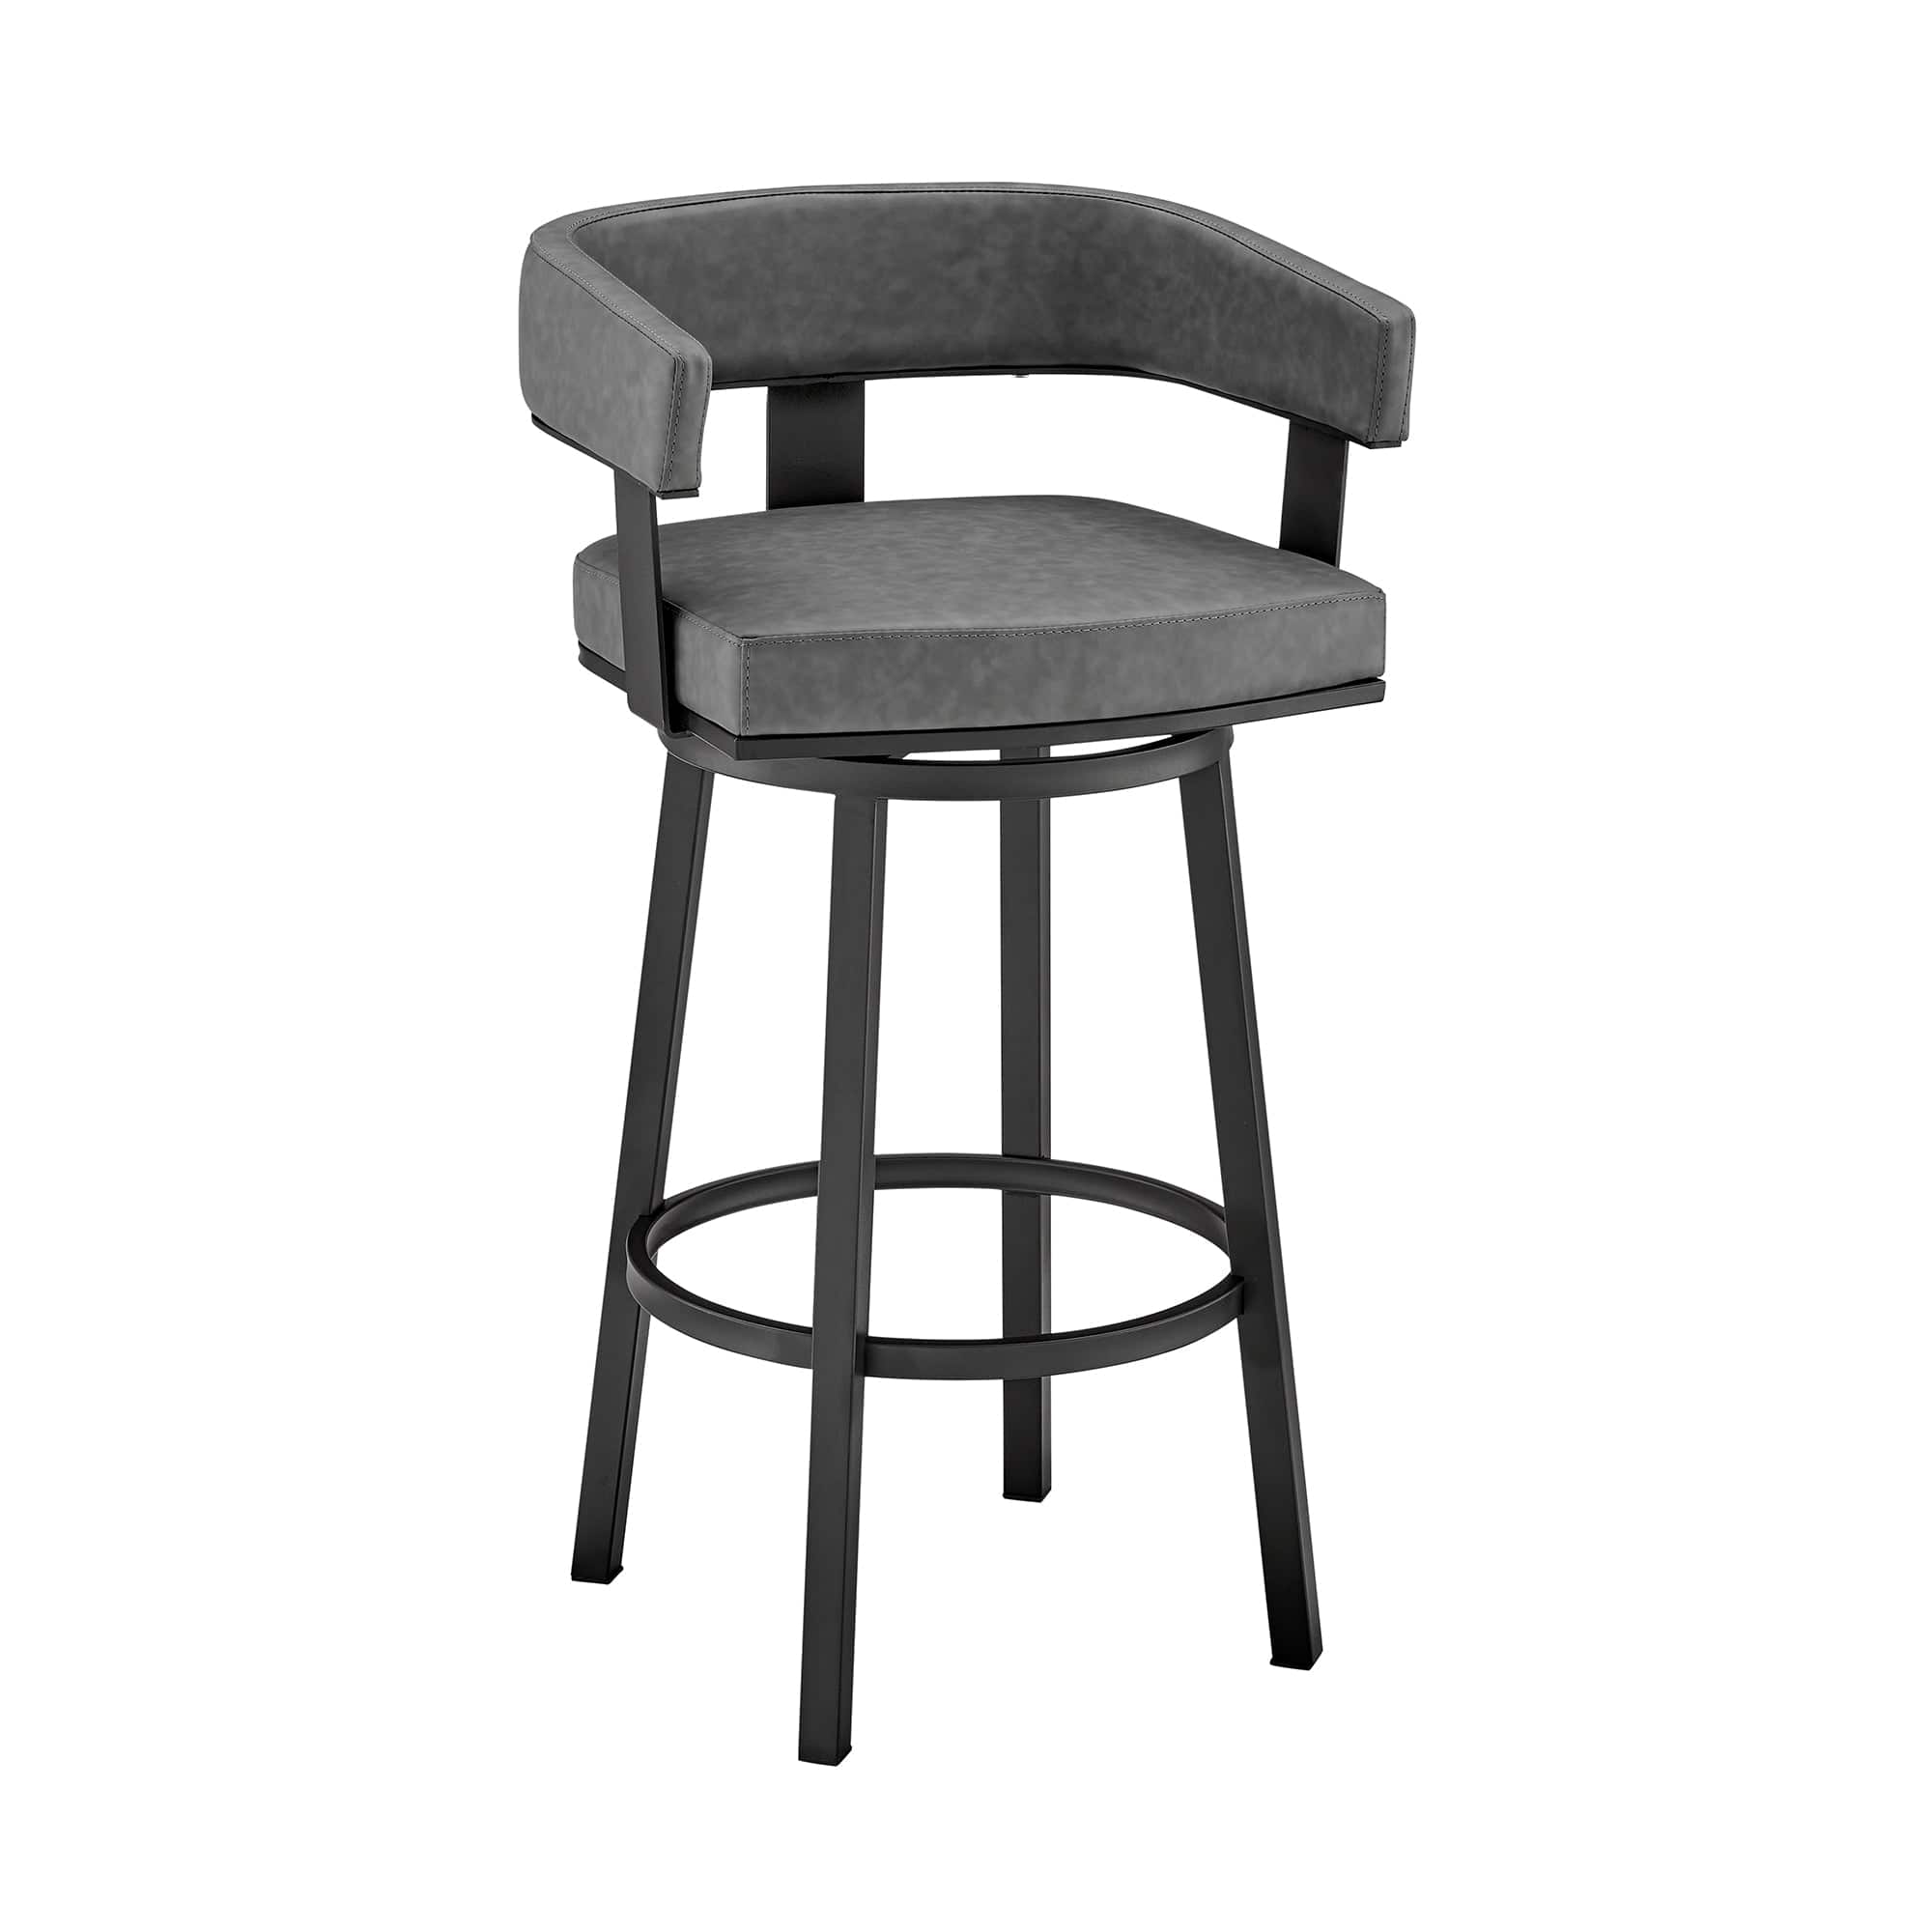 Armen Living Barstool Black Finish and Gray Faux Leather Armen Living - Lorin 26" Counter Height Swivel Bar Stool in Black Finish and Black Faux Leather | LCLRBABLBL26